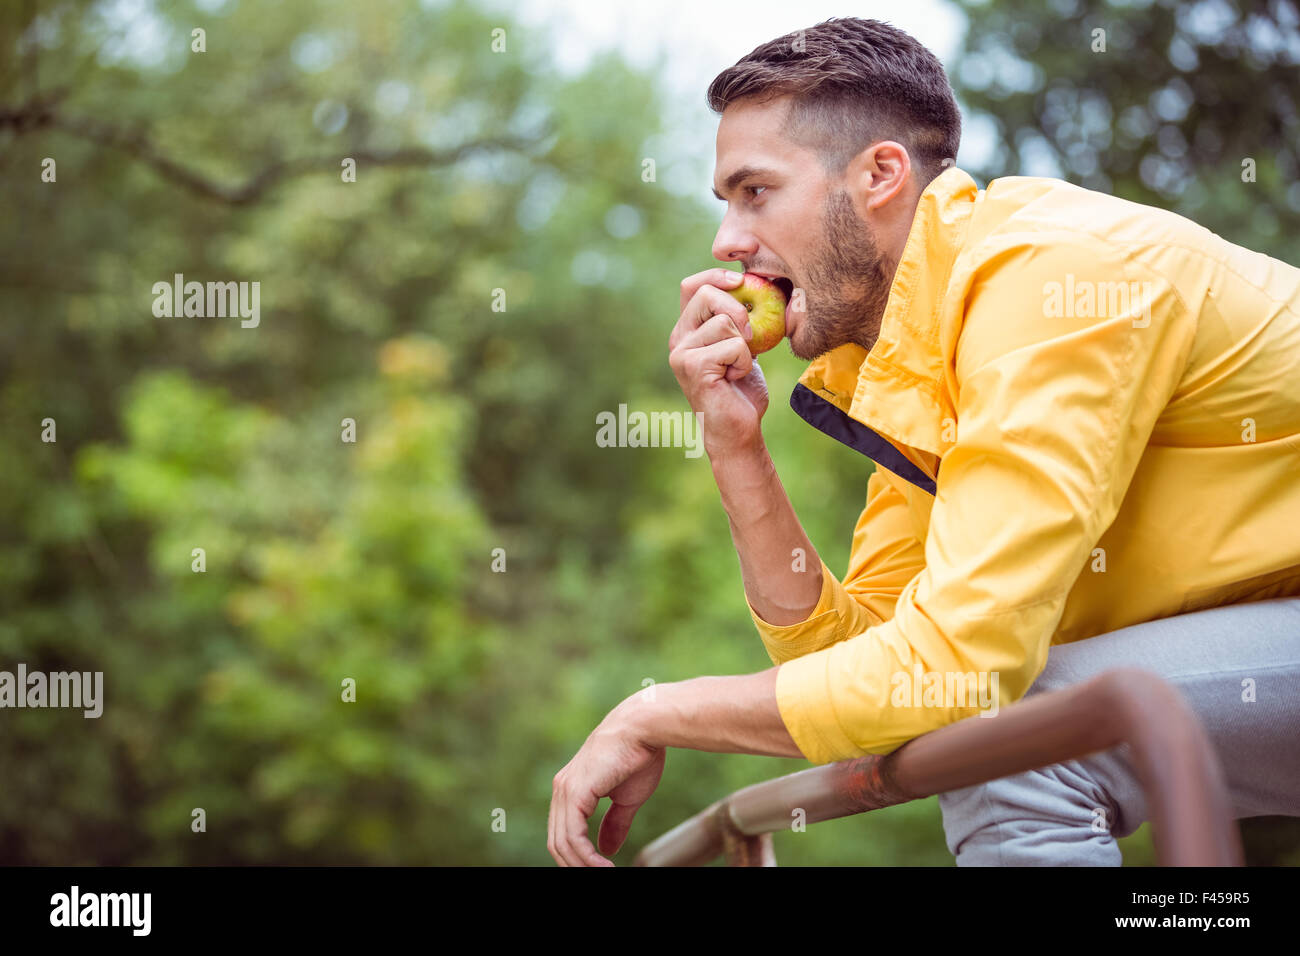 Fit man eating an apple Stock Photo